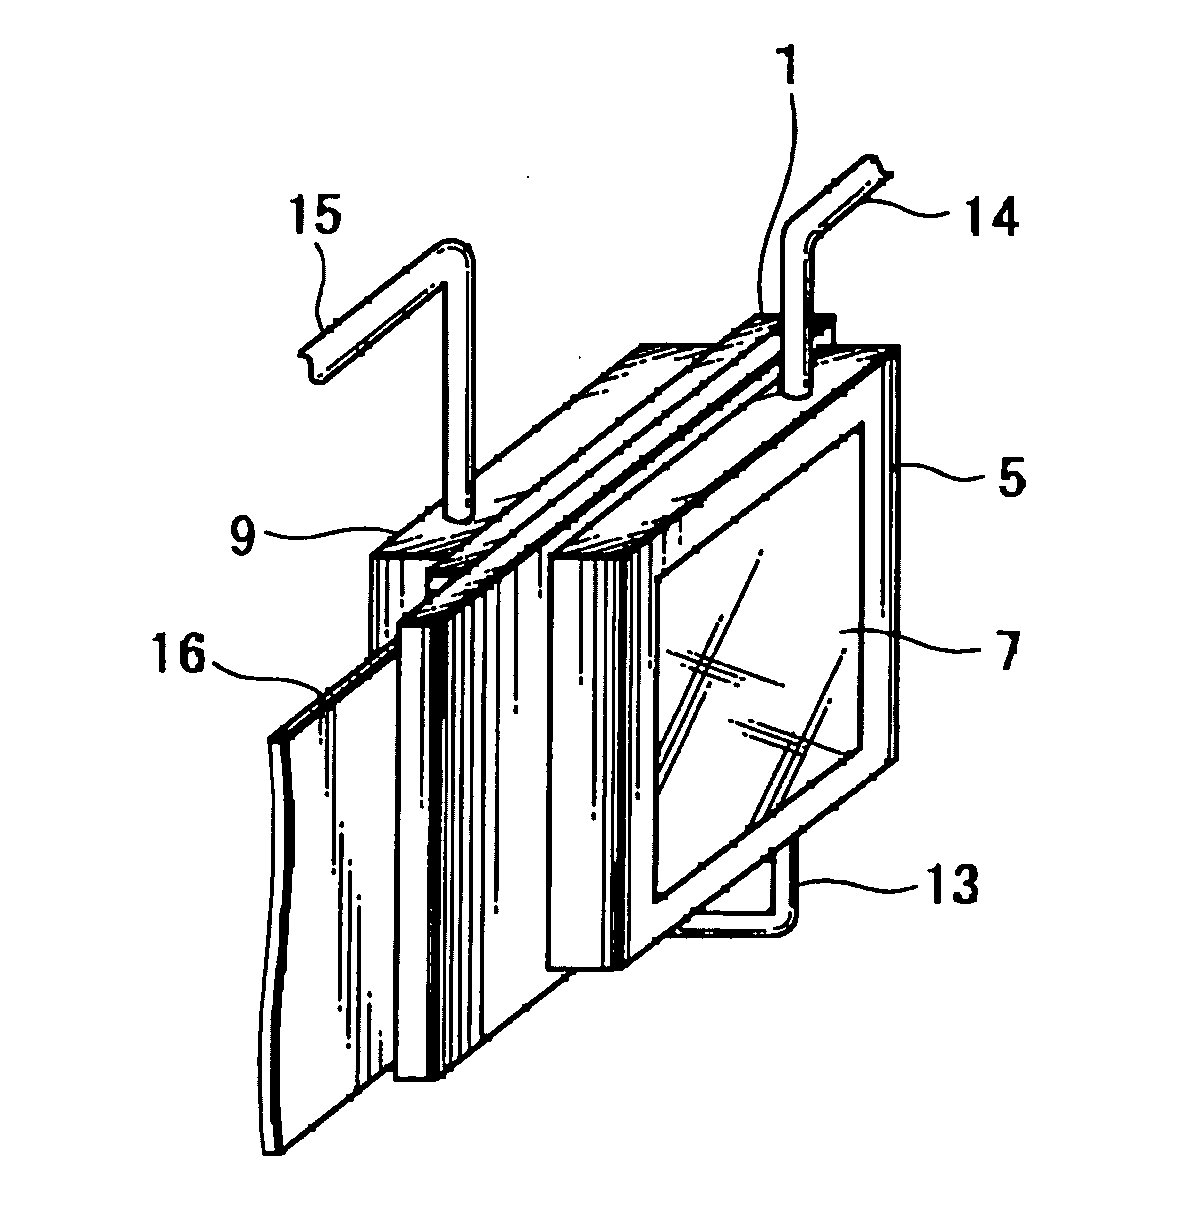 Liquid-cooled liquid crystal panel and method of manufacturing the same as well as liquid crystal projector